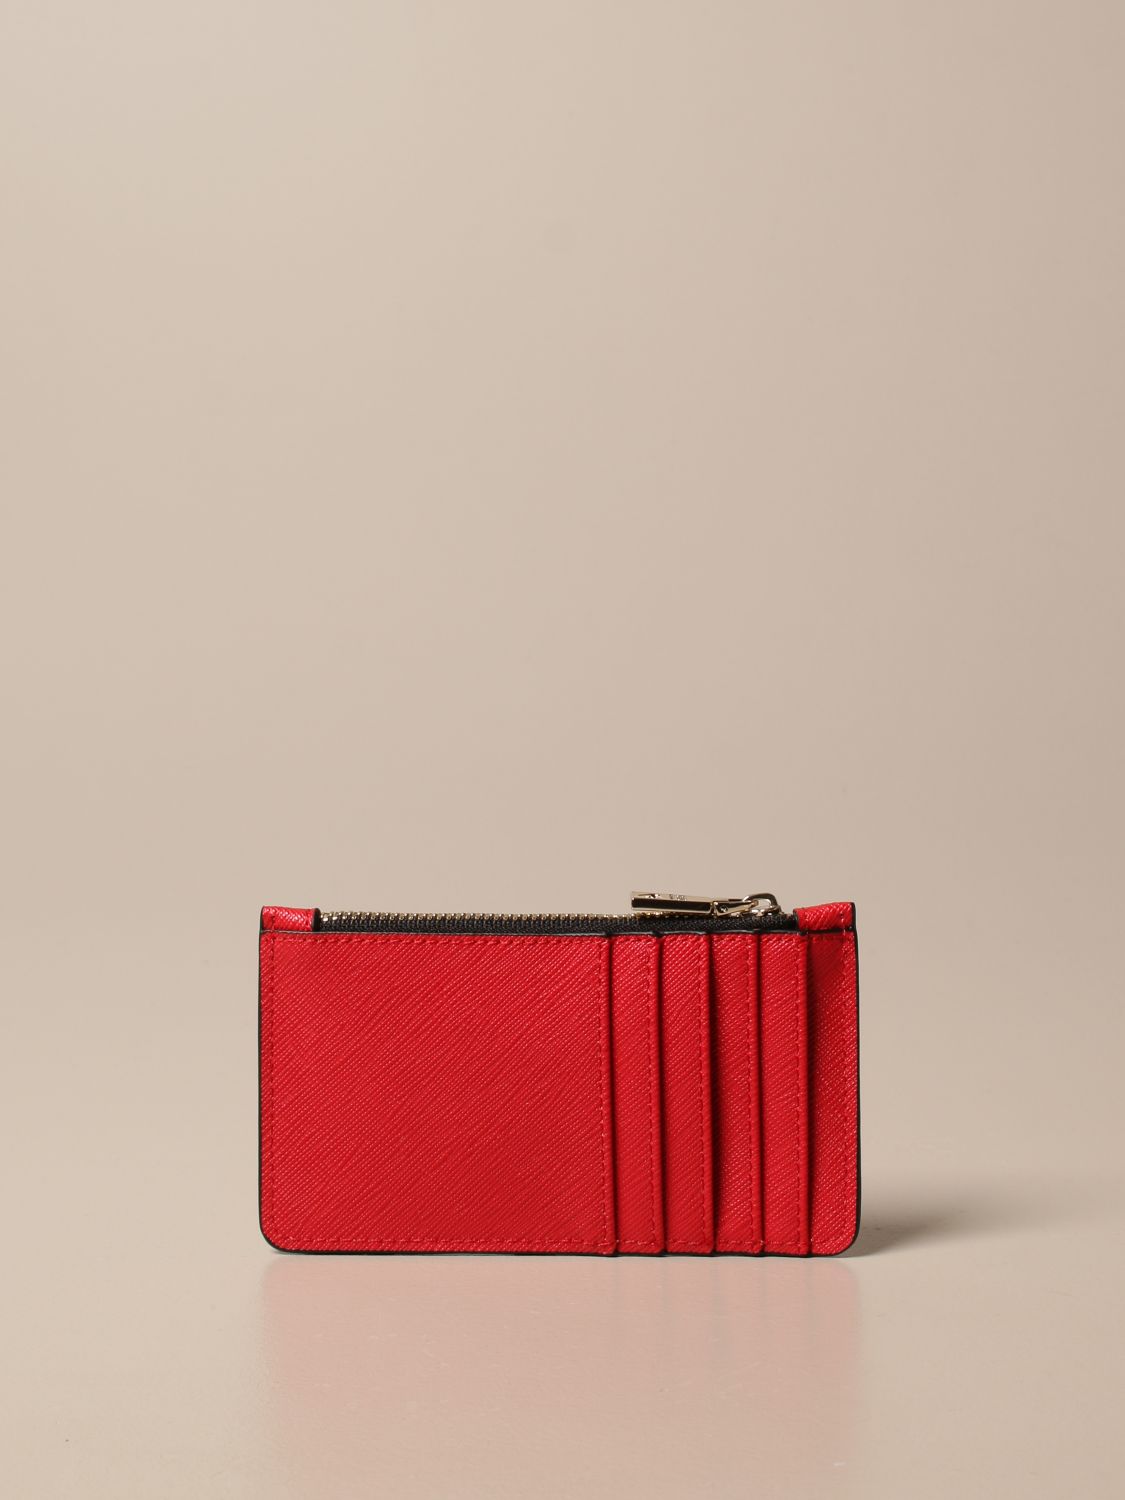 love moschino wallet red